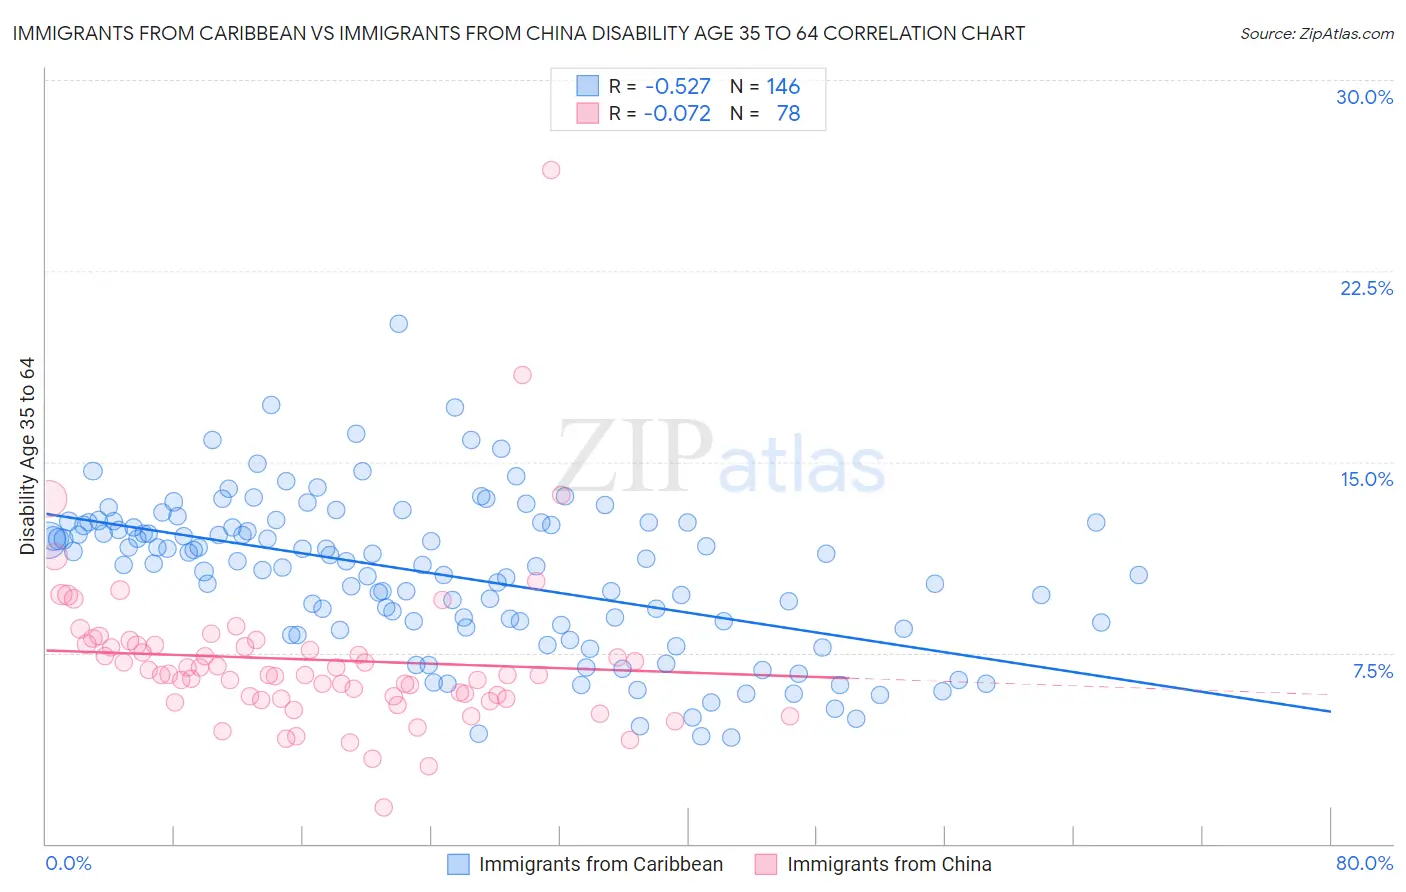 Immigrants from Caribbean vs Immigrants from China Disability Age 35 to 64